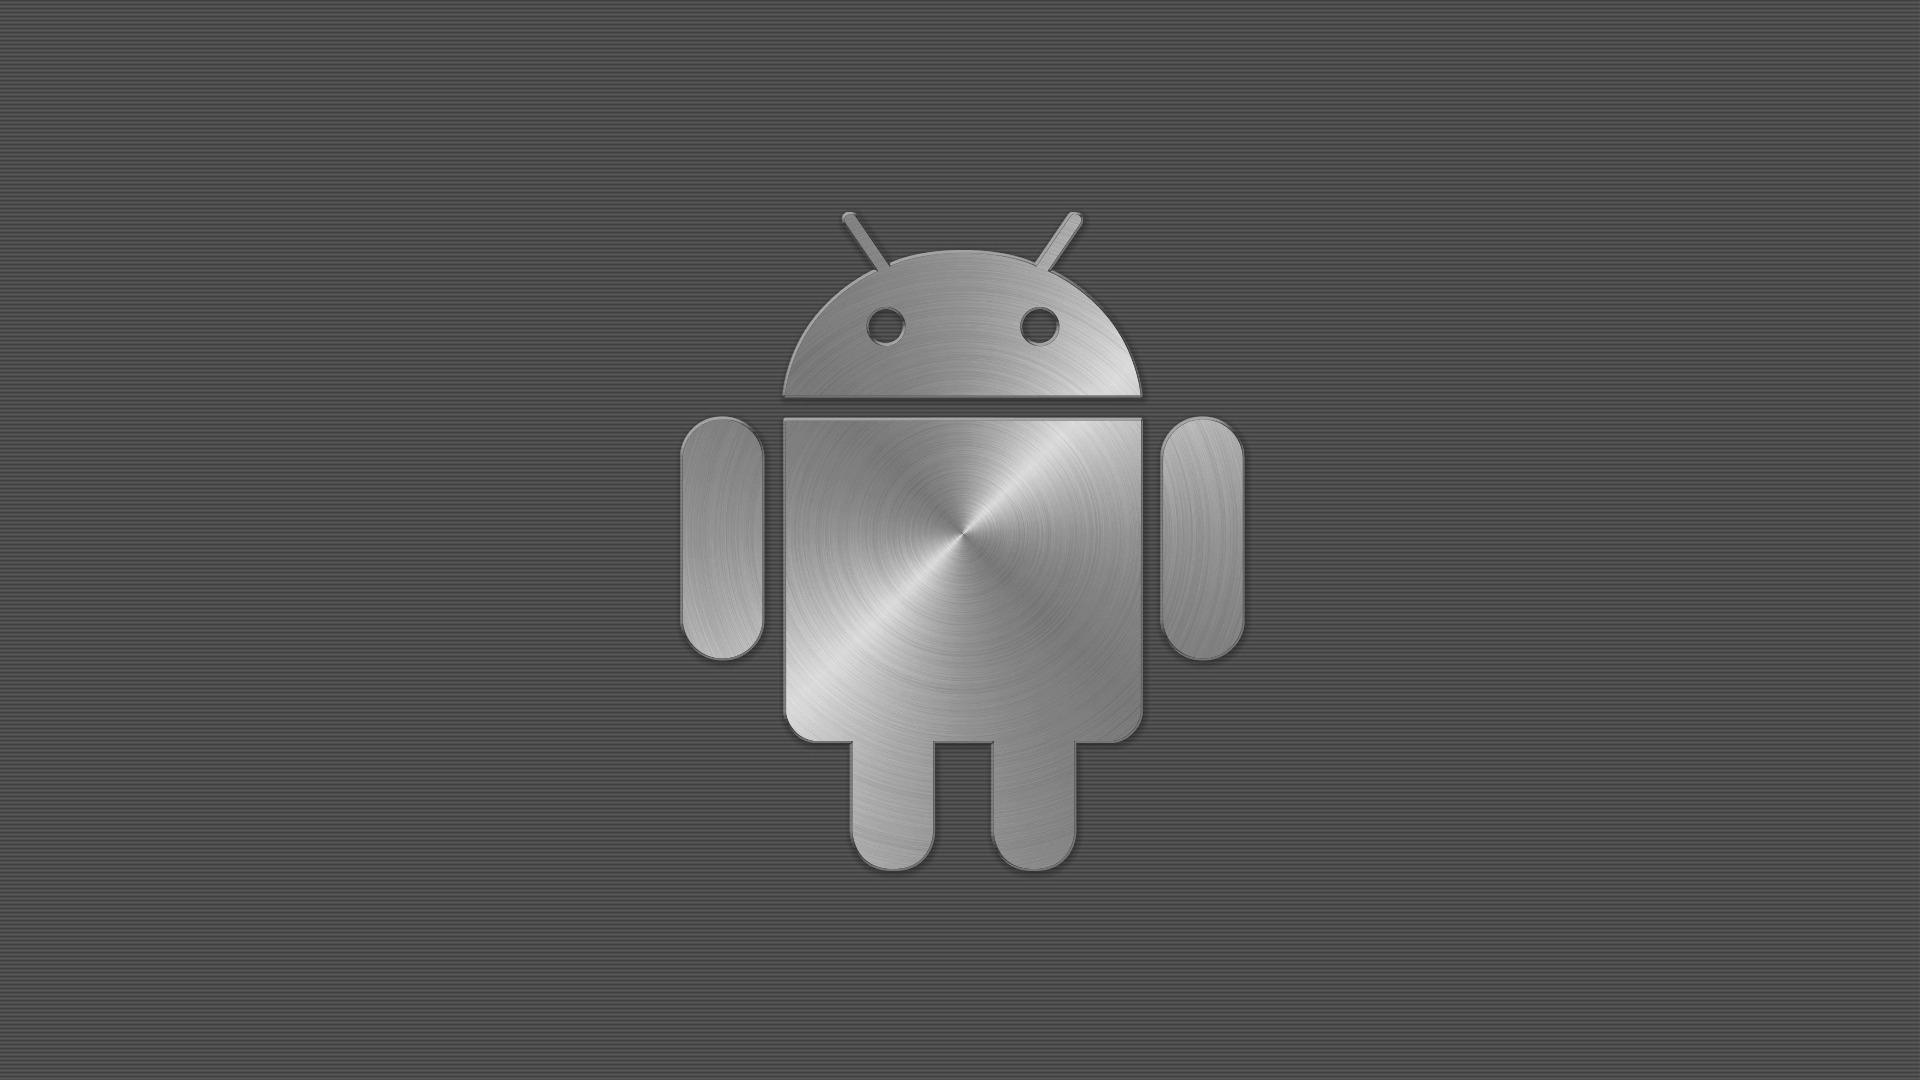 Geek insider, geekinsider, geekinsider. Com,, android silver was a great dream – but perhaps is no more, lady geek